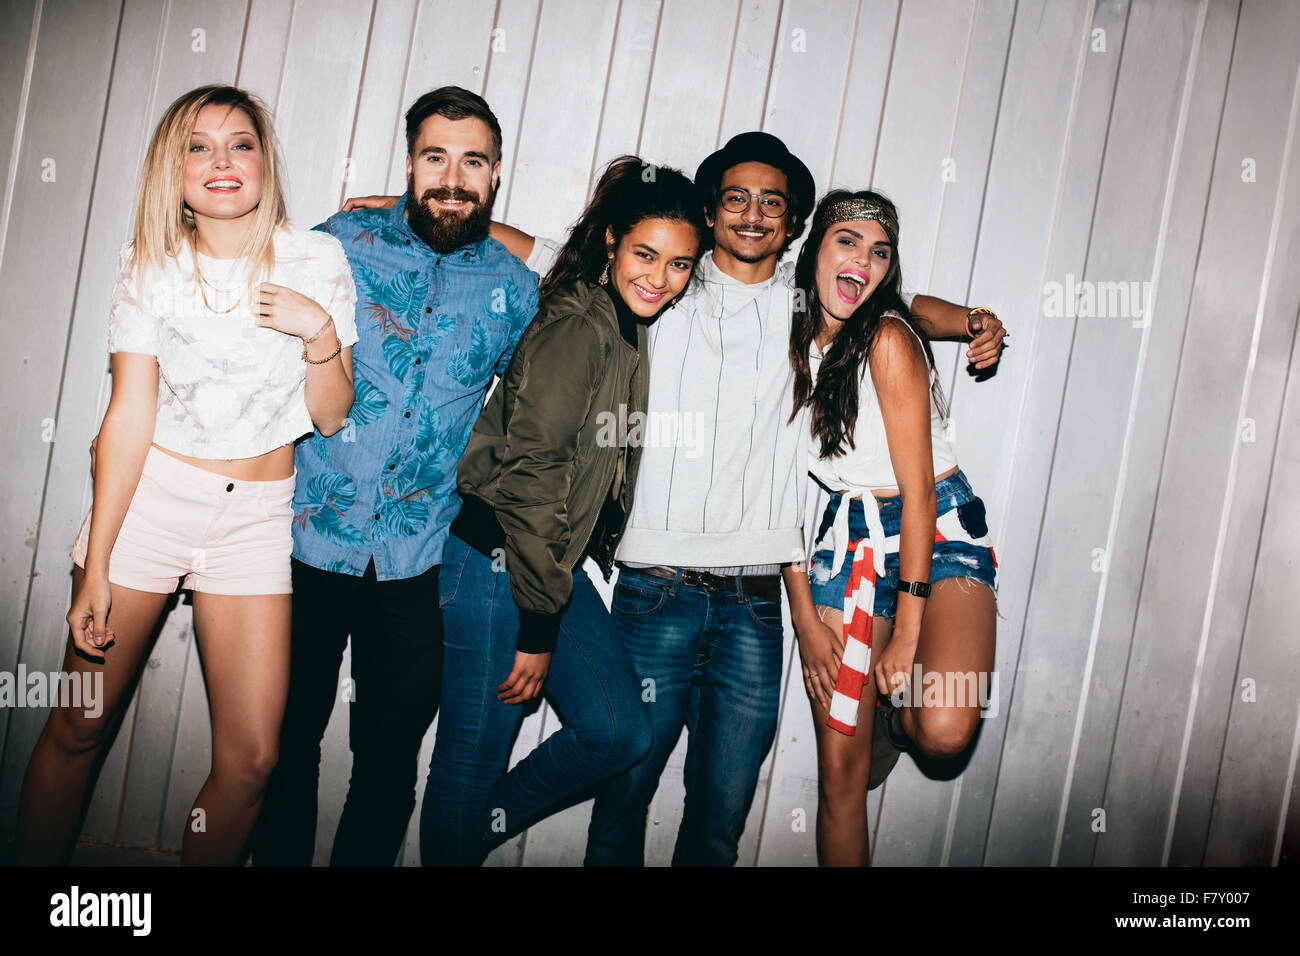 Happy young people standing together outdoors and looking at camera laughing. Young friends hanging out at night during a party. Stock Photo